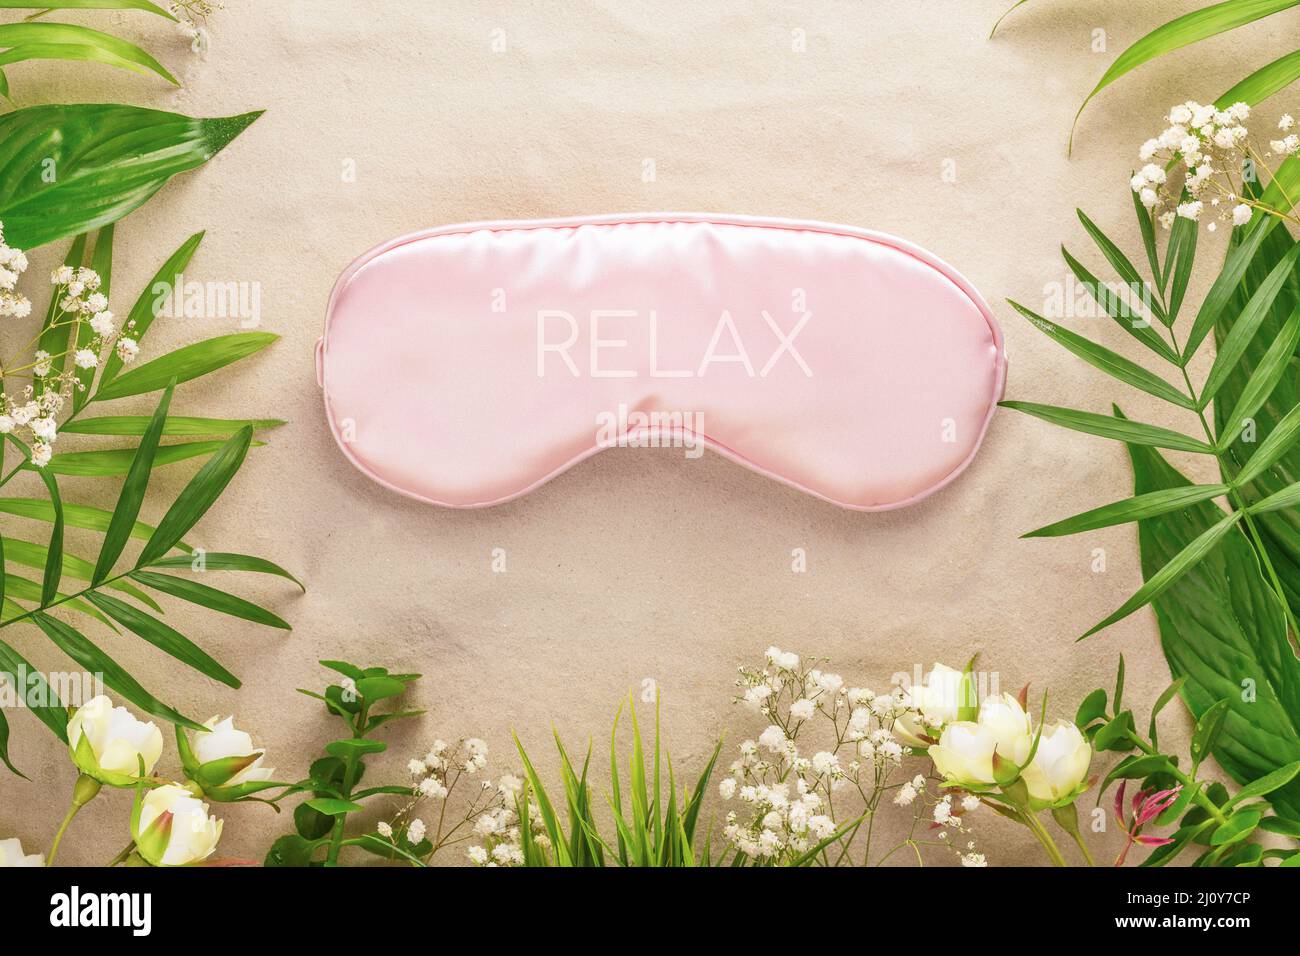 Relax concept. Wellbeing composition with pink mask for sleep, tropic plant and flowers on a sand background. Insomnia or depression treatment and men Stock Photo